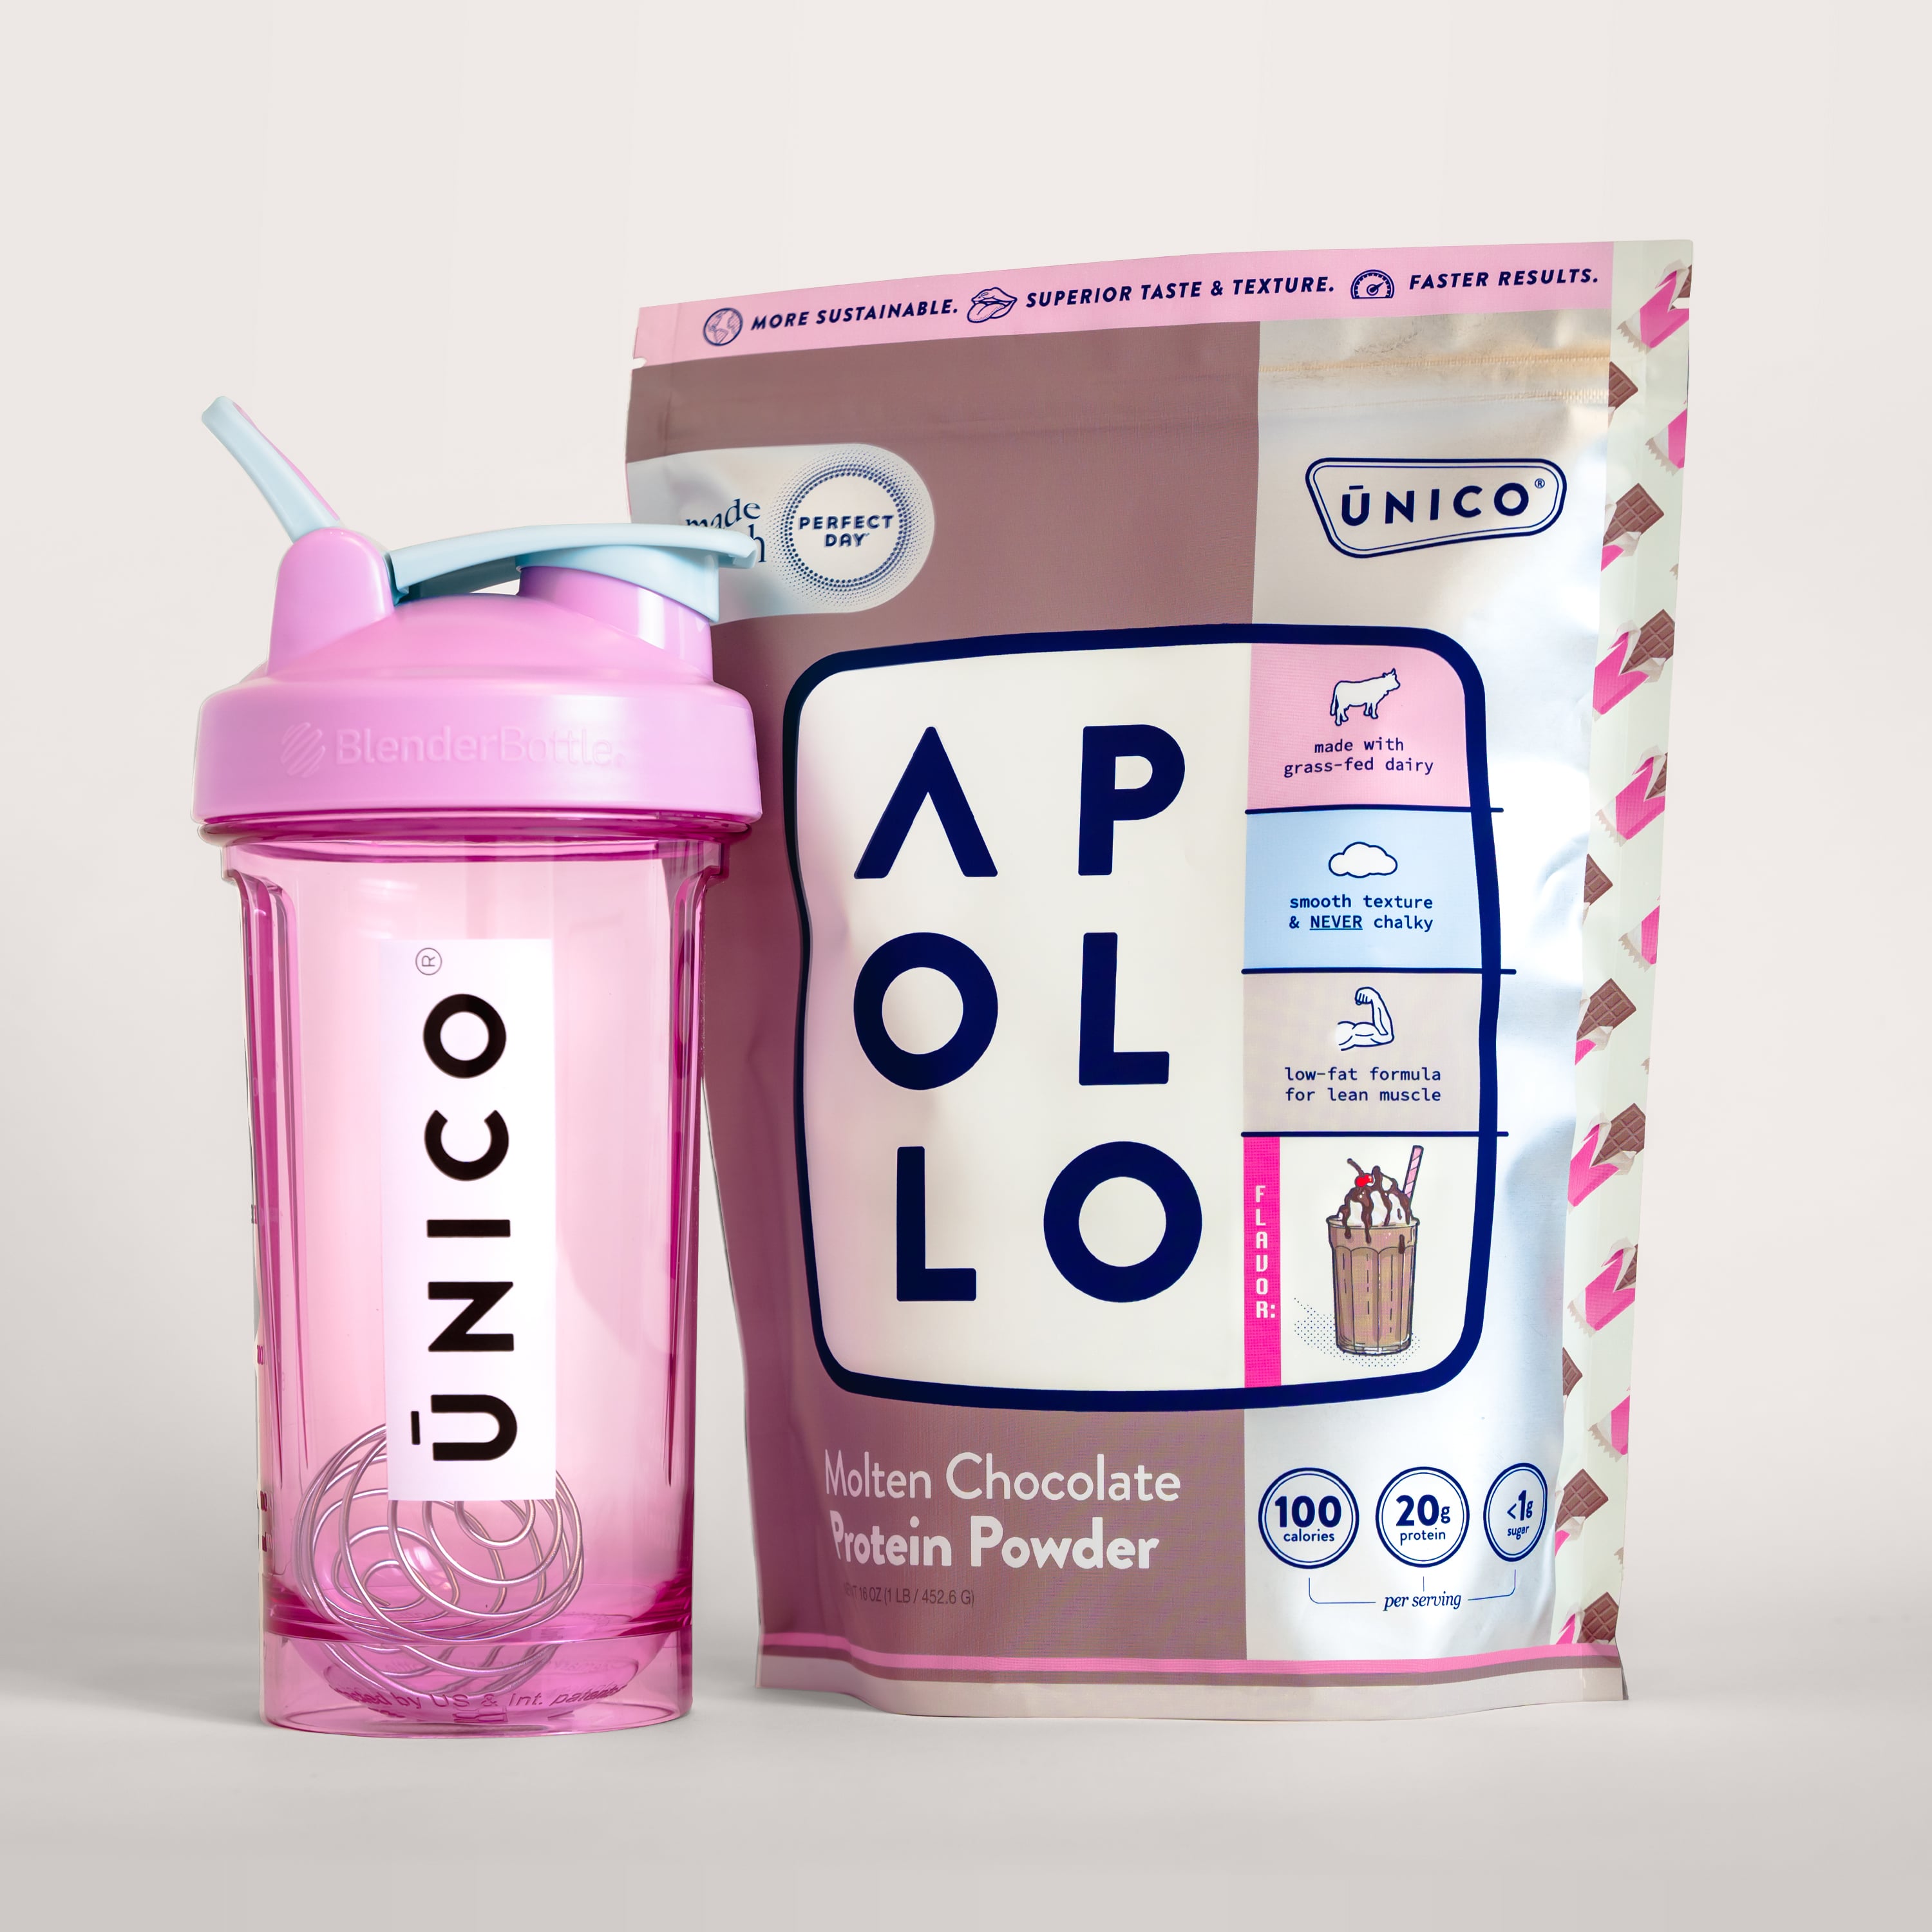 unico shaker and protein powder stack photo featuring chocolate flavored protein powder and cute purple shaker bottle